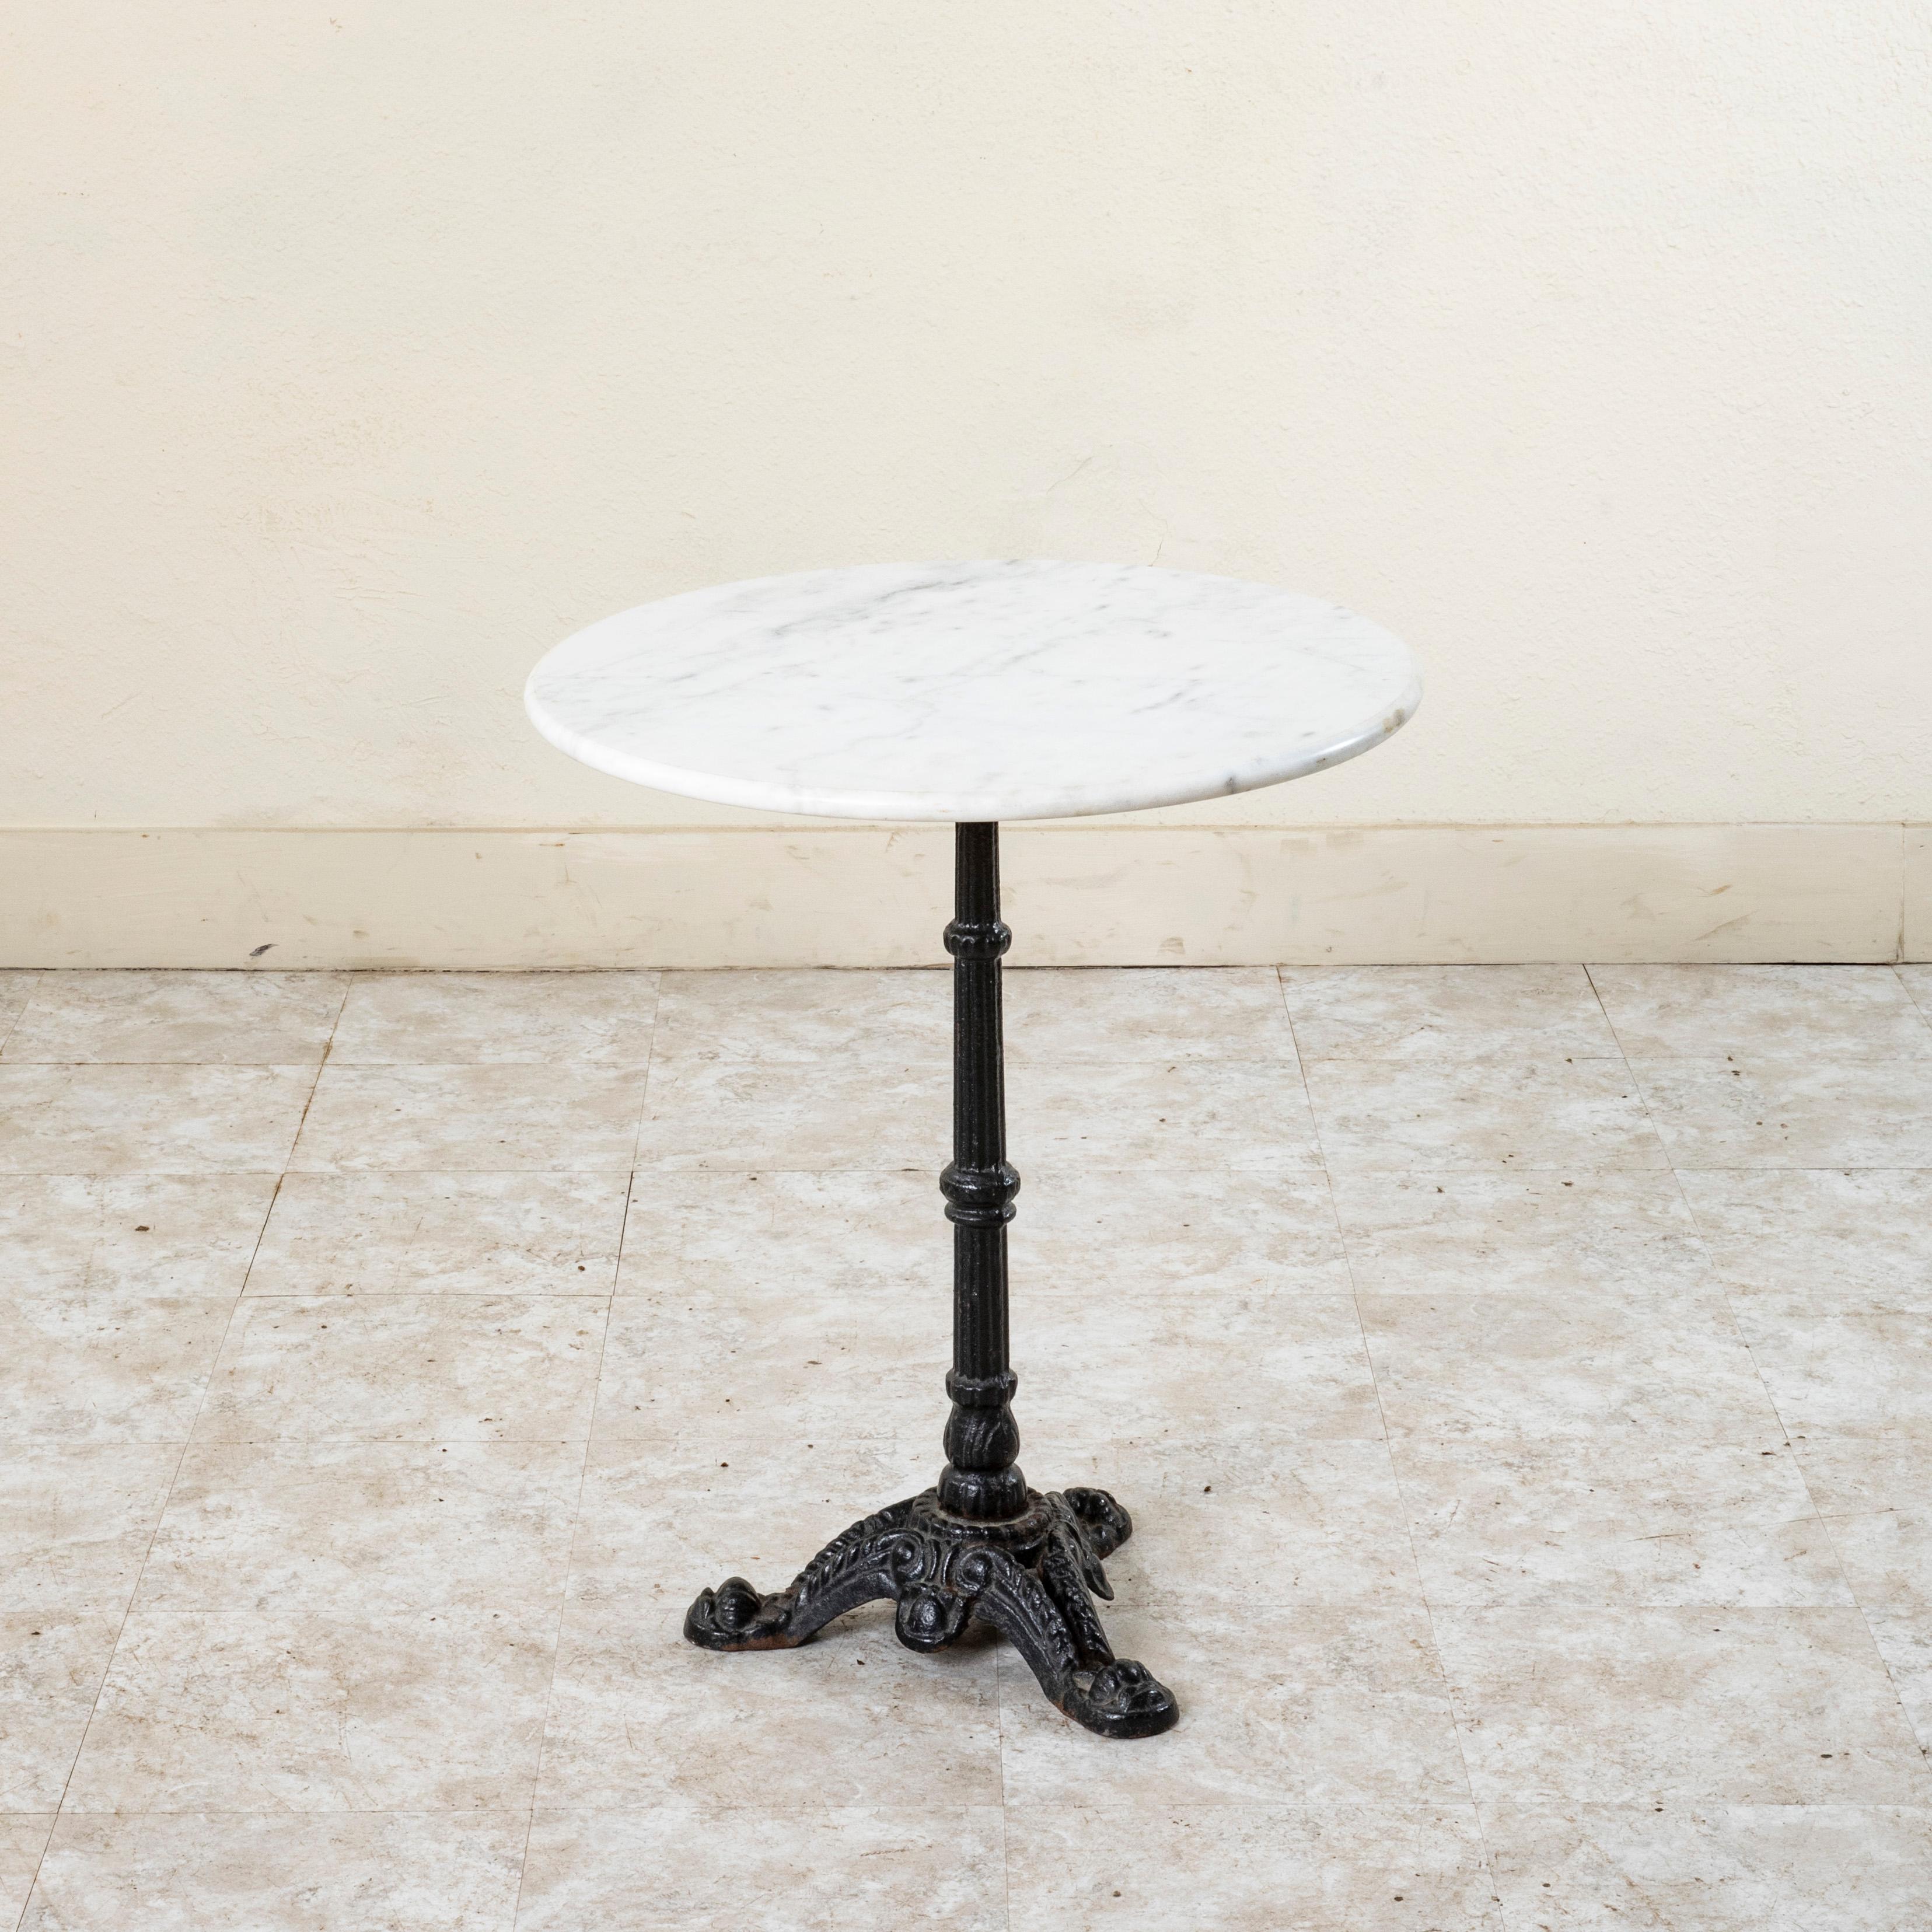 This classic French iron bistro table or cafe table from the mid twentieth century features a round honed white marble 23-inch diameter top with a rounded edge. The top rests on a cast iron base supported by a central fluted pillar. The base is